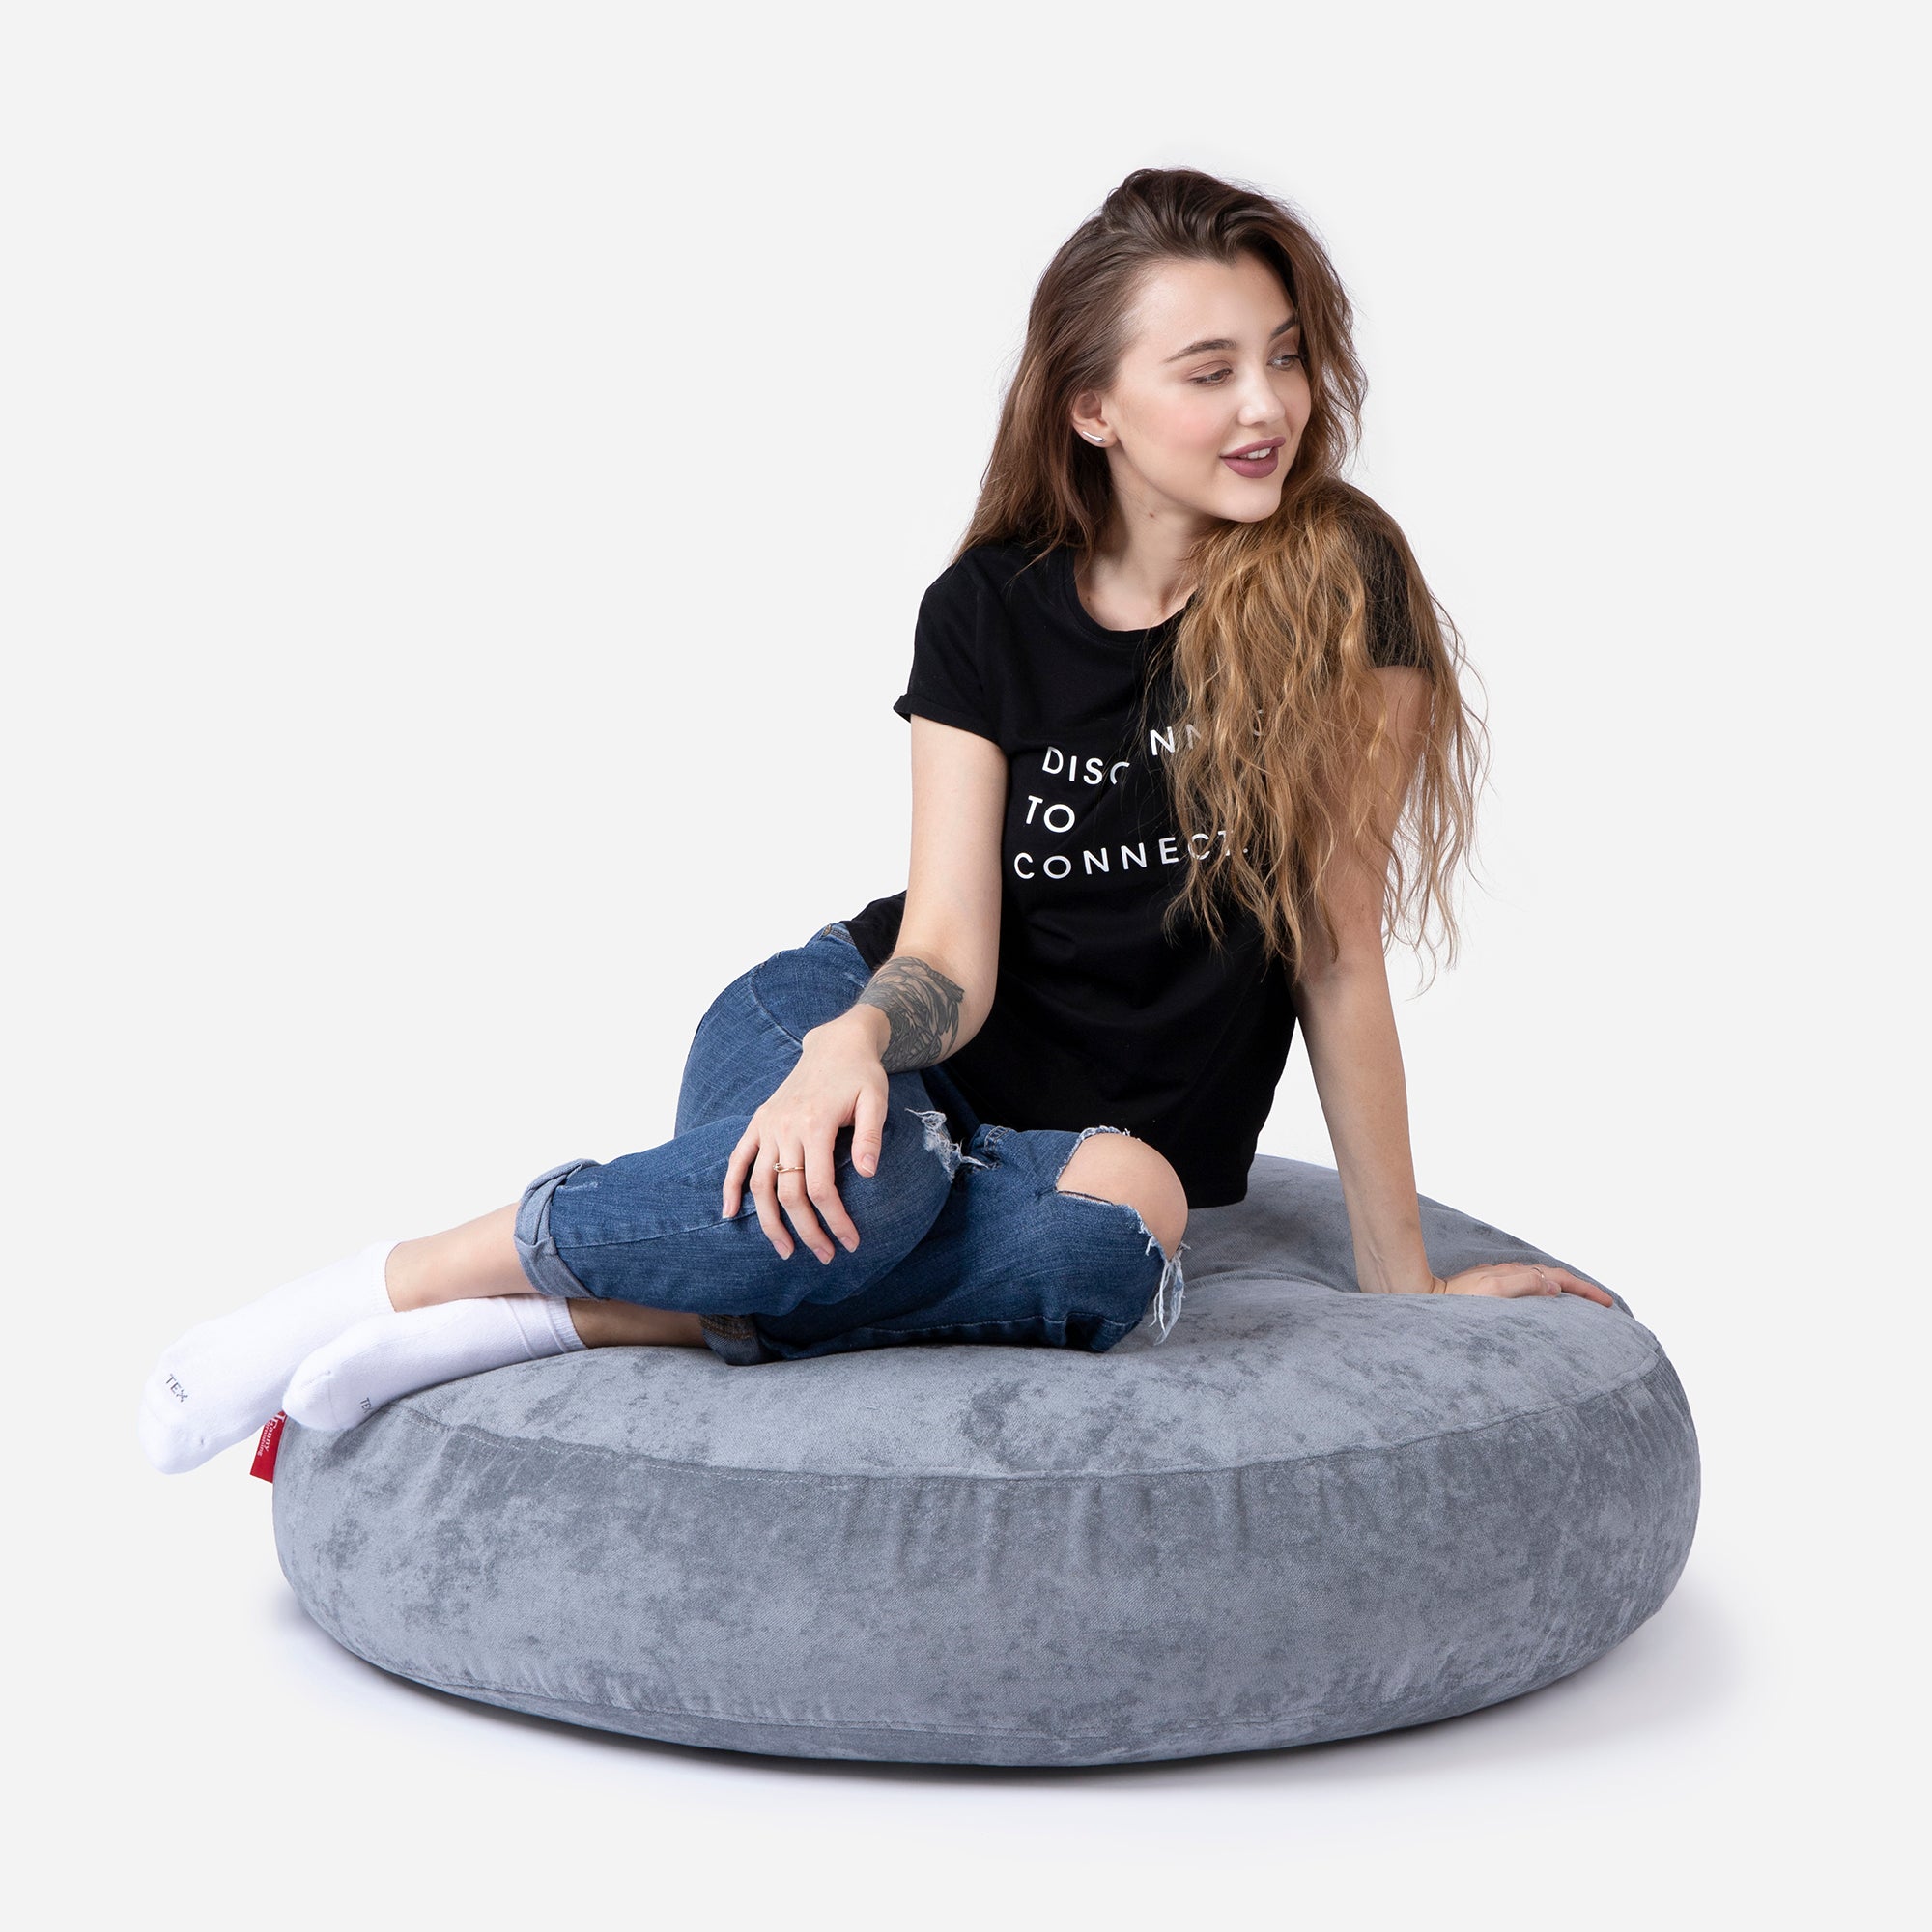 Pouf, Ottoman Gray color by Lanny with girl seating on it 